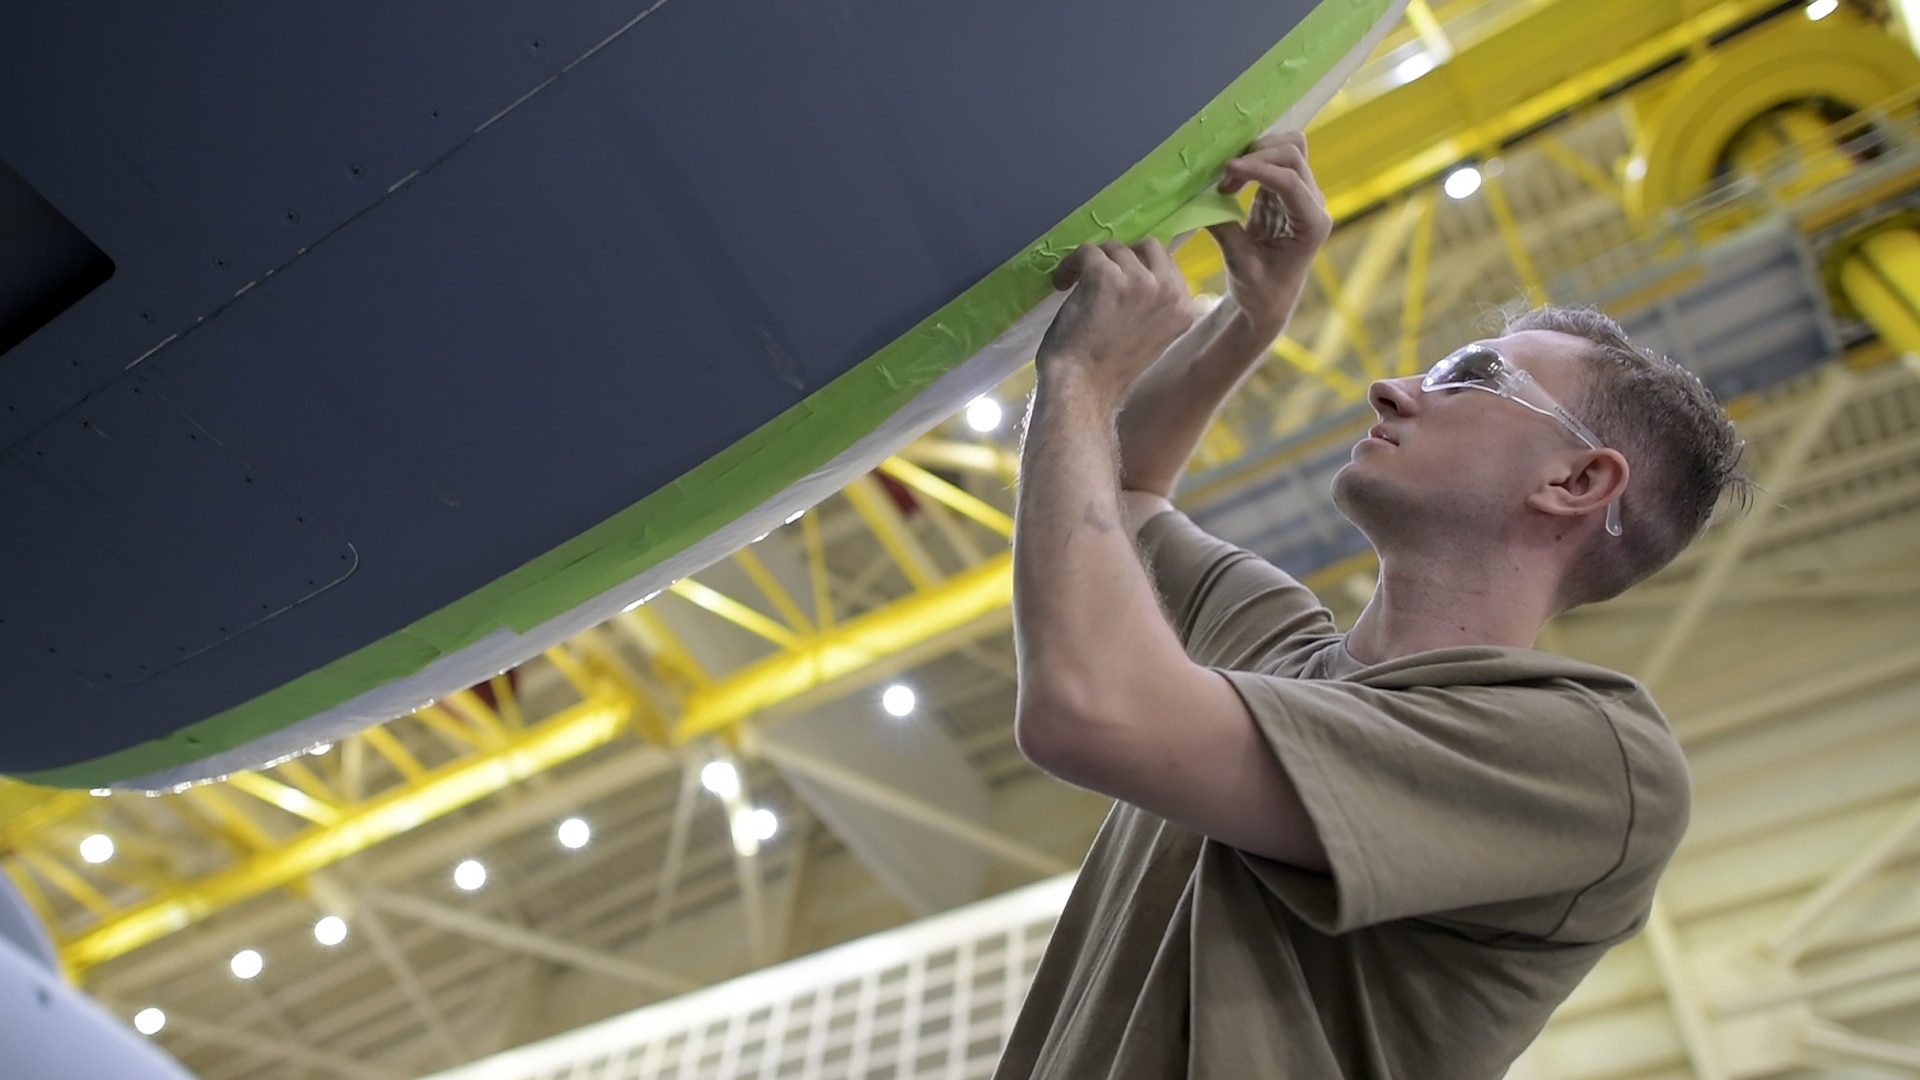 Senior Airman Ian Roush, 437th Maintenance Squadron, Fabrication Flight corrosion control and structural repair, pre-masks a C-17 engine prior to sanding the Aircraft Oct. 15, 2019, at Joint Base Charleston, S.C. Pre-masking is the first step prior to painting the aircraft. Approximately 12 aircraft go through the corrosion control process annually and it takes approximately two weeks complete each C-17.